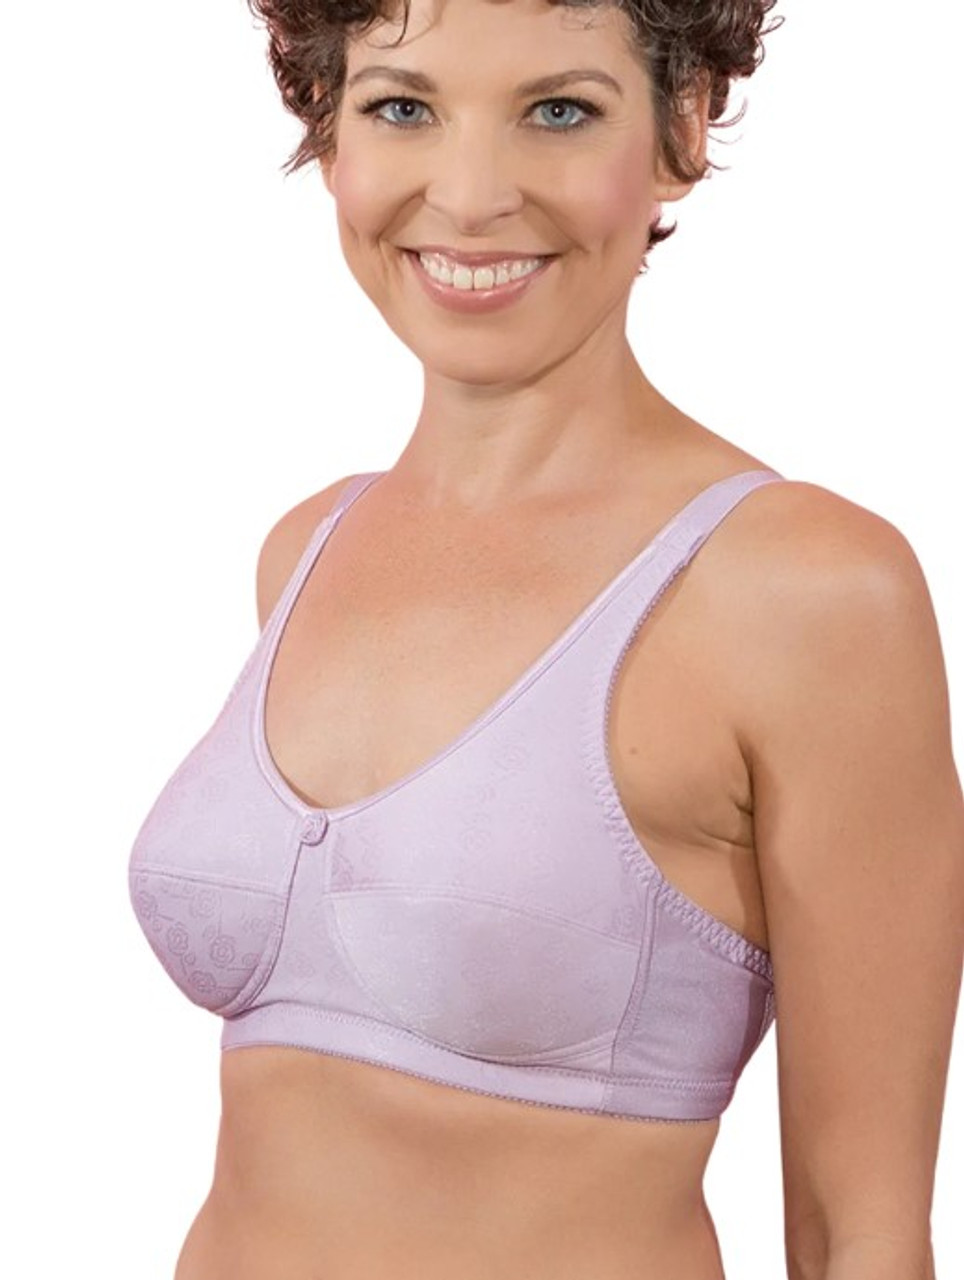 American Breast Care Mastectomy Bra Satin Trim T-Shirt Size 38D Rose at   Women's Clothing store